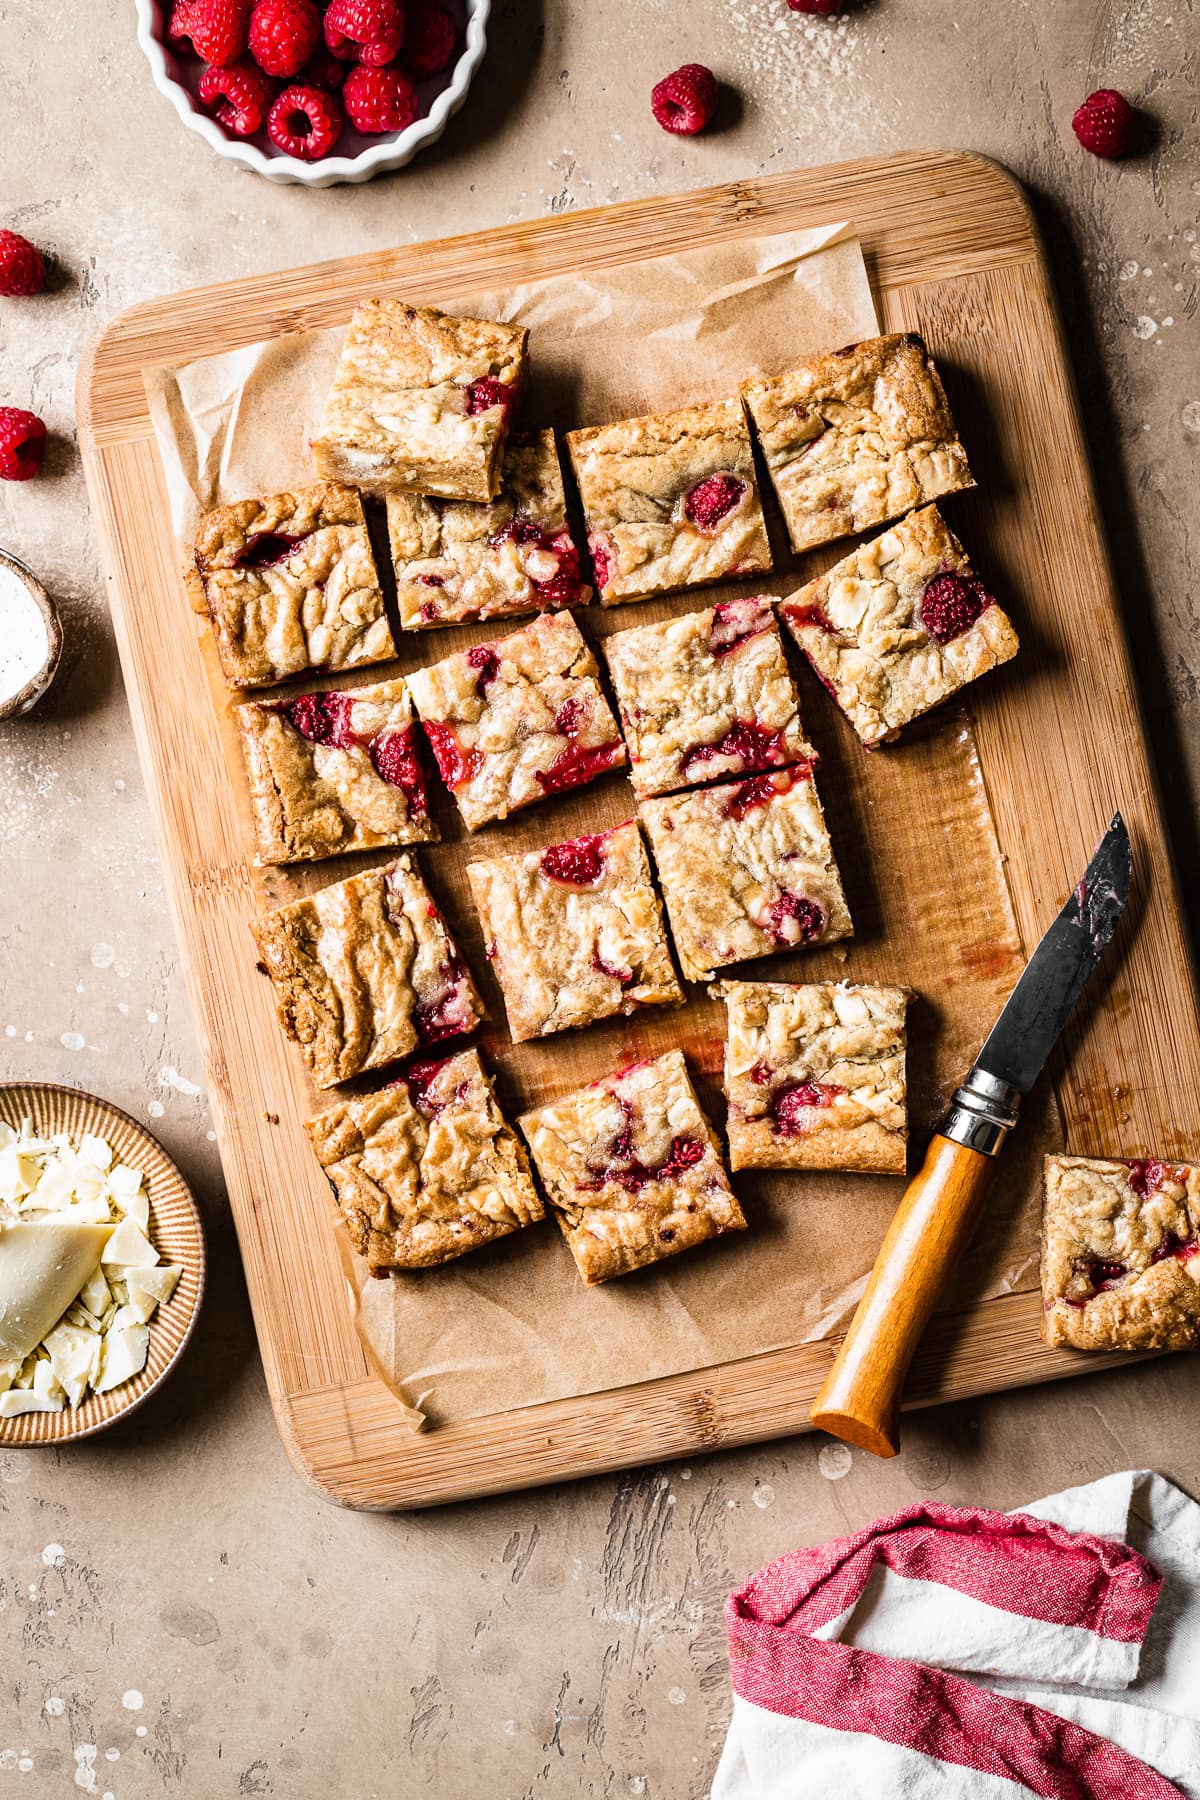 Raspberry stuffed bar cookies cut into squares on a wooden cutting board with knife resting nearby. Small bowls of raspberries and white chocolate peek in from the edge of the image. A red and white napkin rests at bottom right.